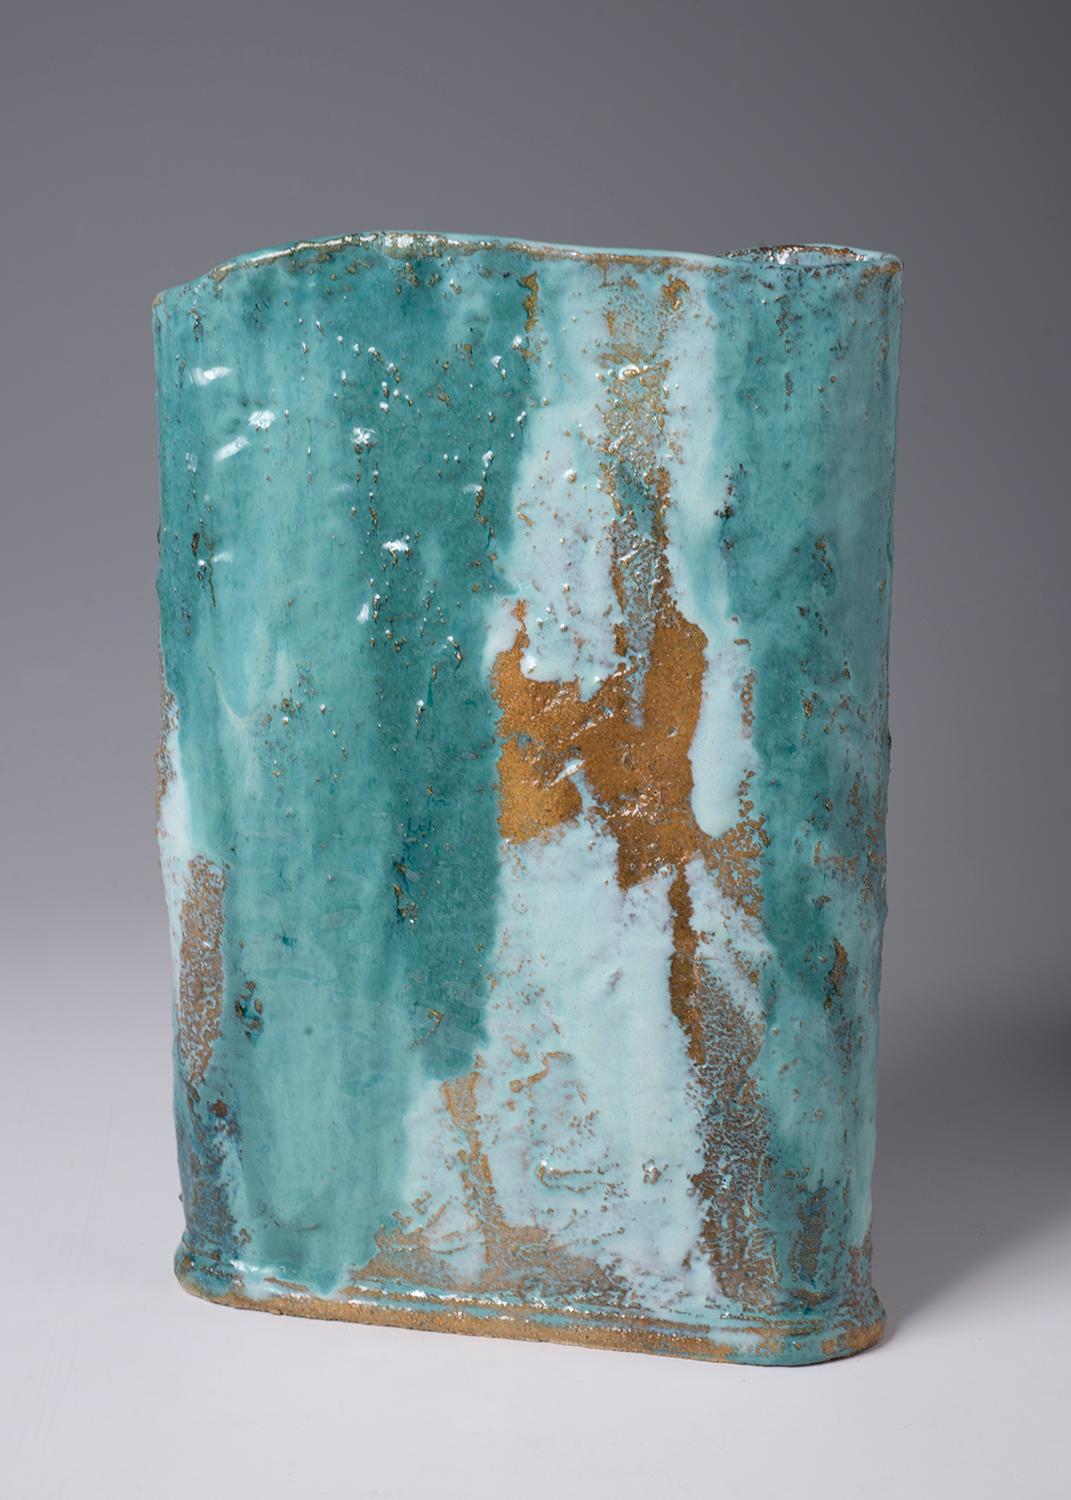 Untitled #38 - Stoneware vessel glossy green and white glazes by Marc Cohen For Sale 4